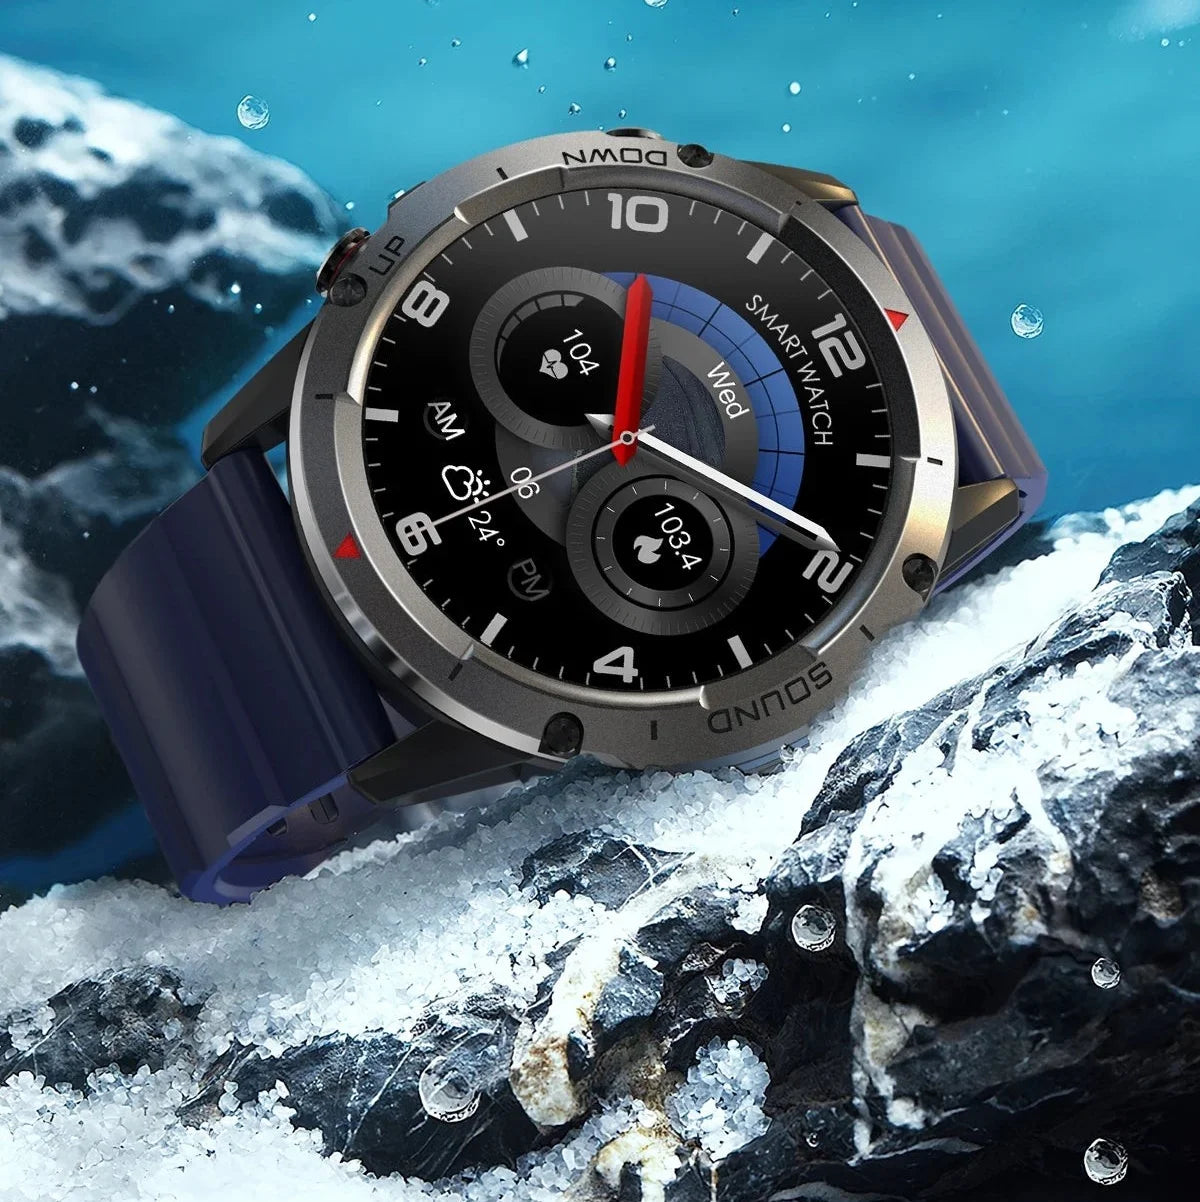 Men Bluetooth Call IP68 Waterproof fitness Modes Health Custom Dial Sport smartwatch women For Android iOS  -  GeraldBlack.com